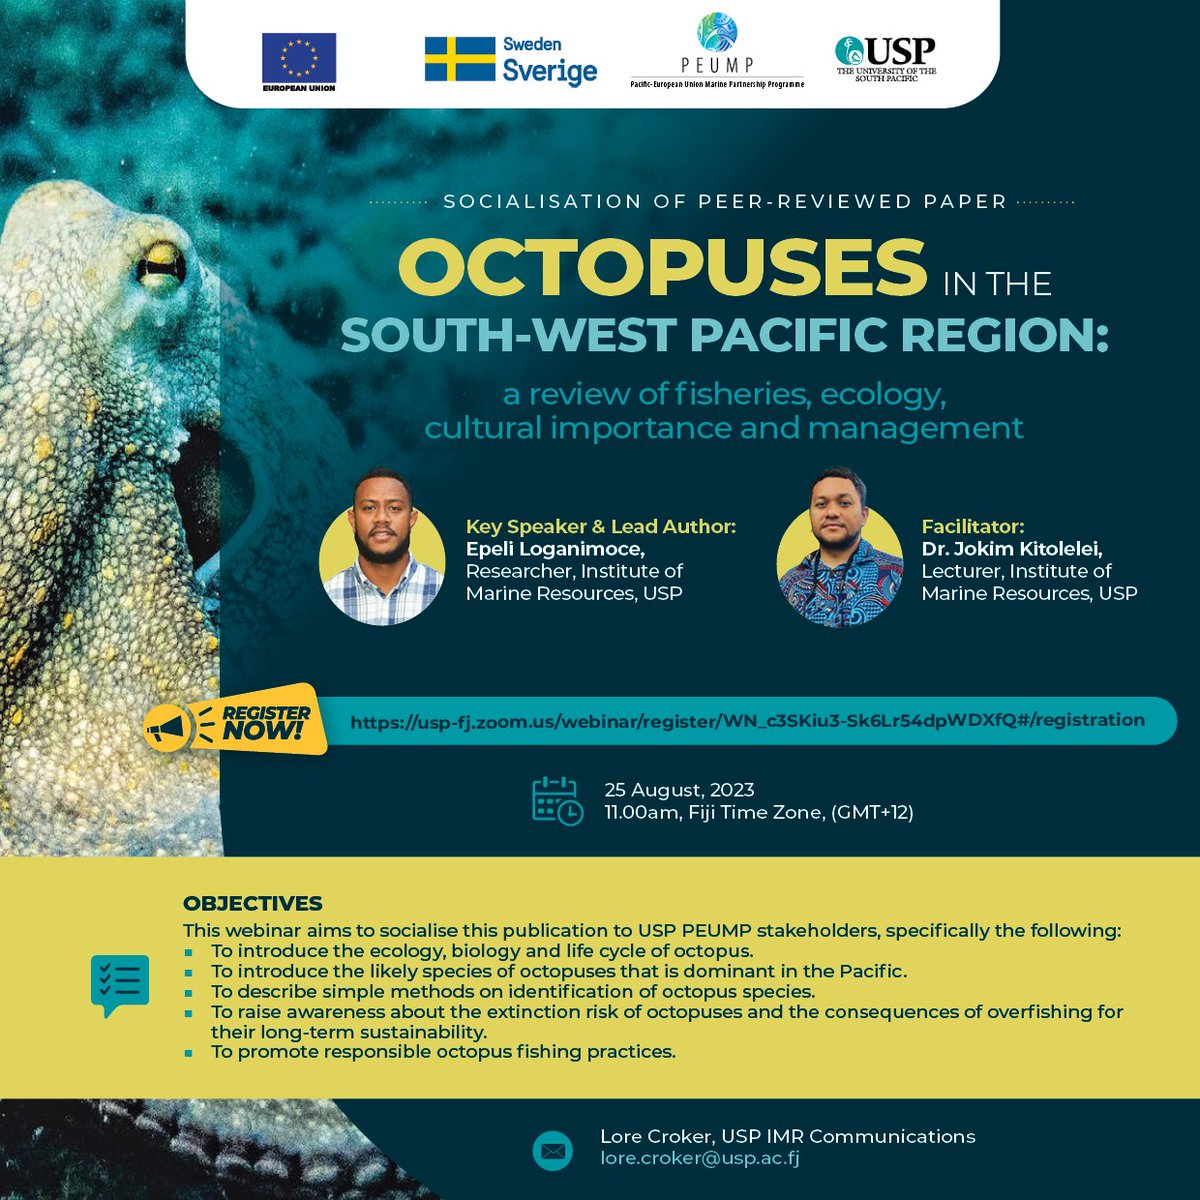 🌊Dive into the Deep: Exploring Octopuses in the South-West Pacific. Join the conversation at 11 am this Friday and become part of the movement towards responsible stewardship of our marine treasures #PEUMP #OctopusReview #SustainableSeas #culturalconnections